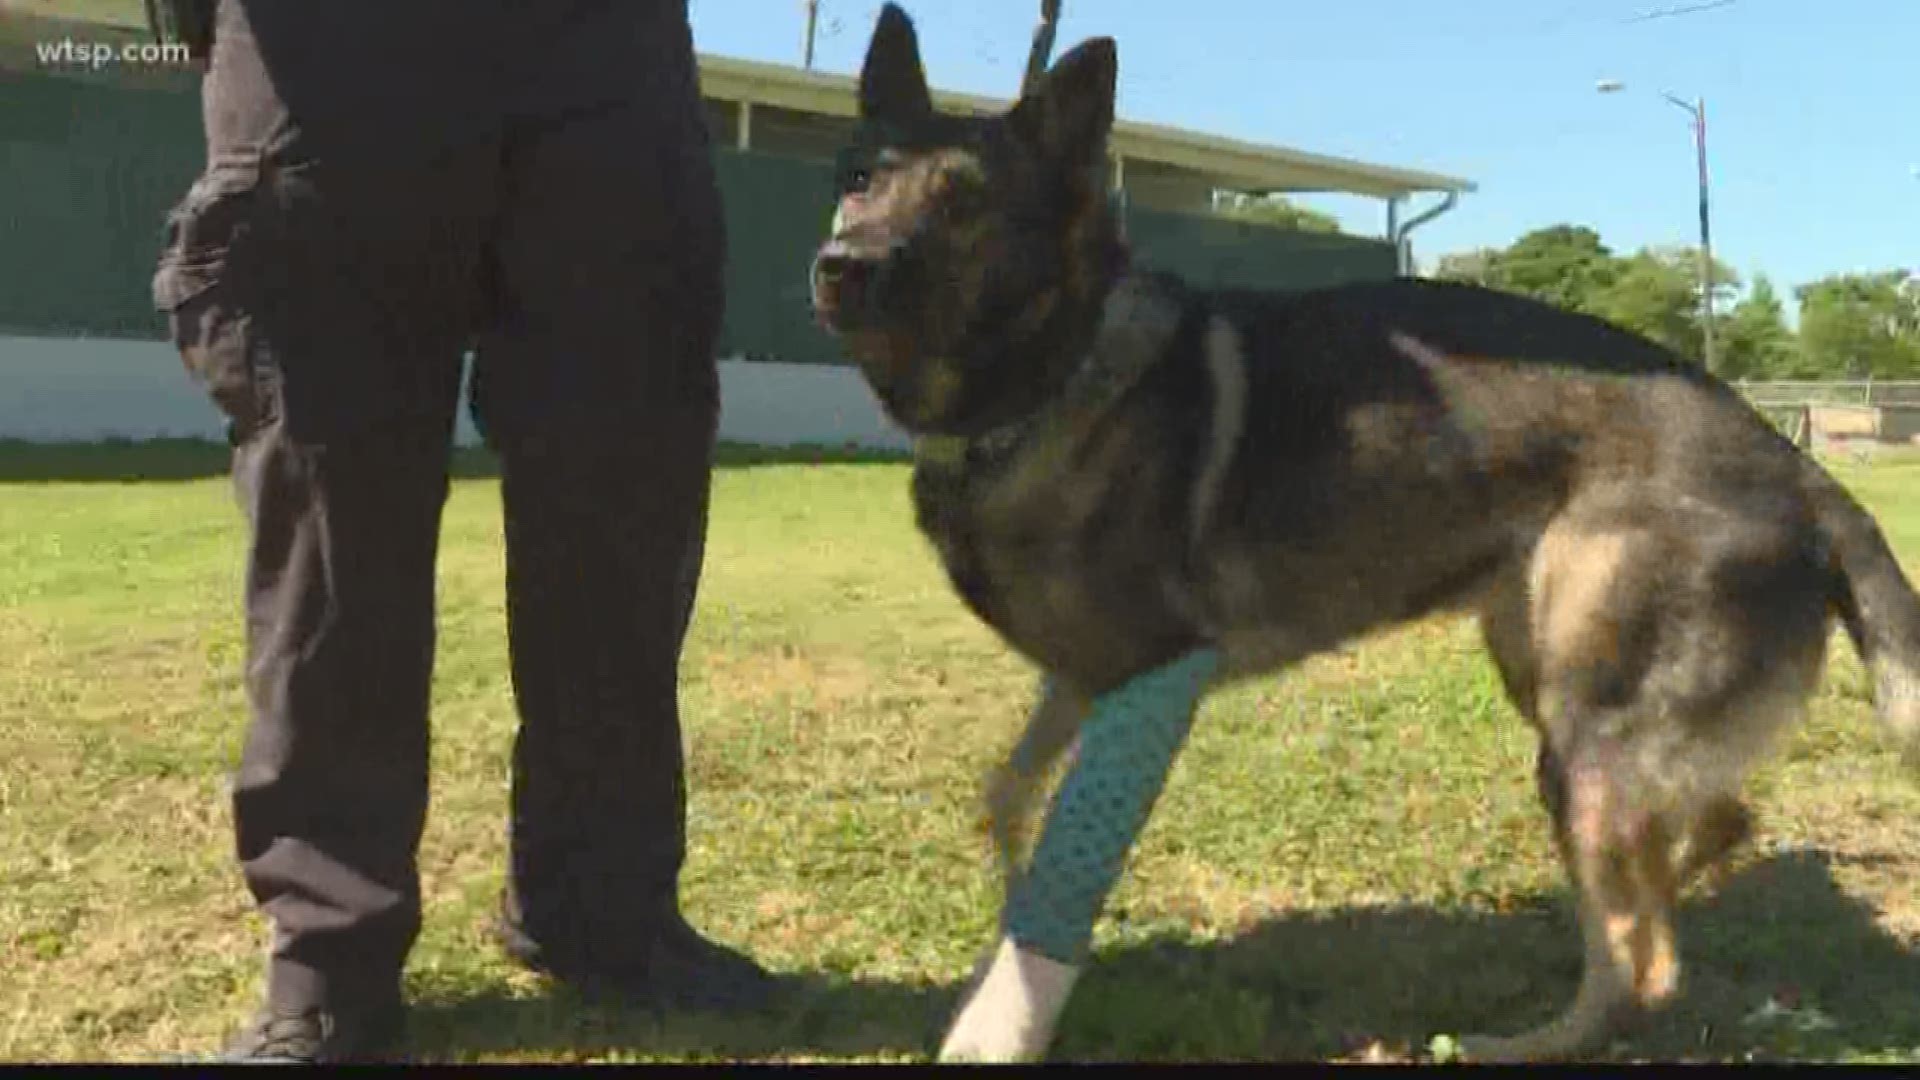 In an exclusive story, we learn how the dog is recovering from his wounds.